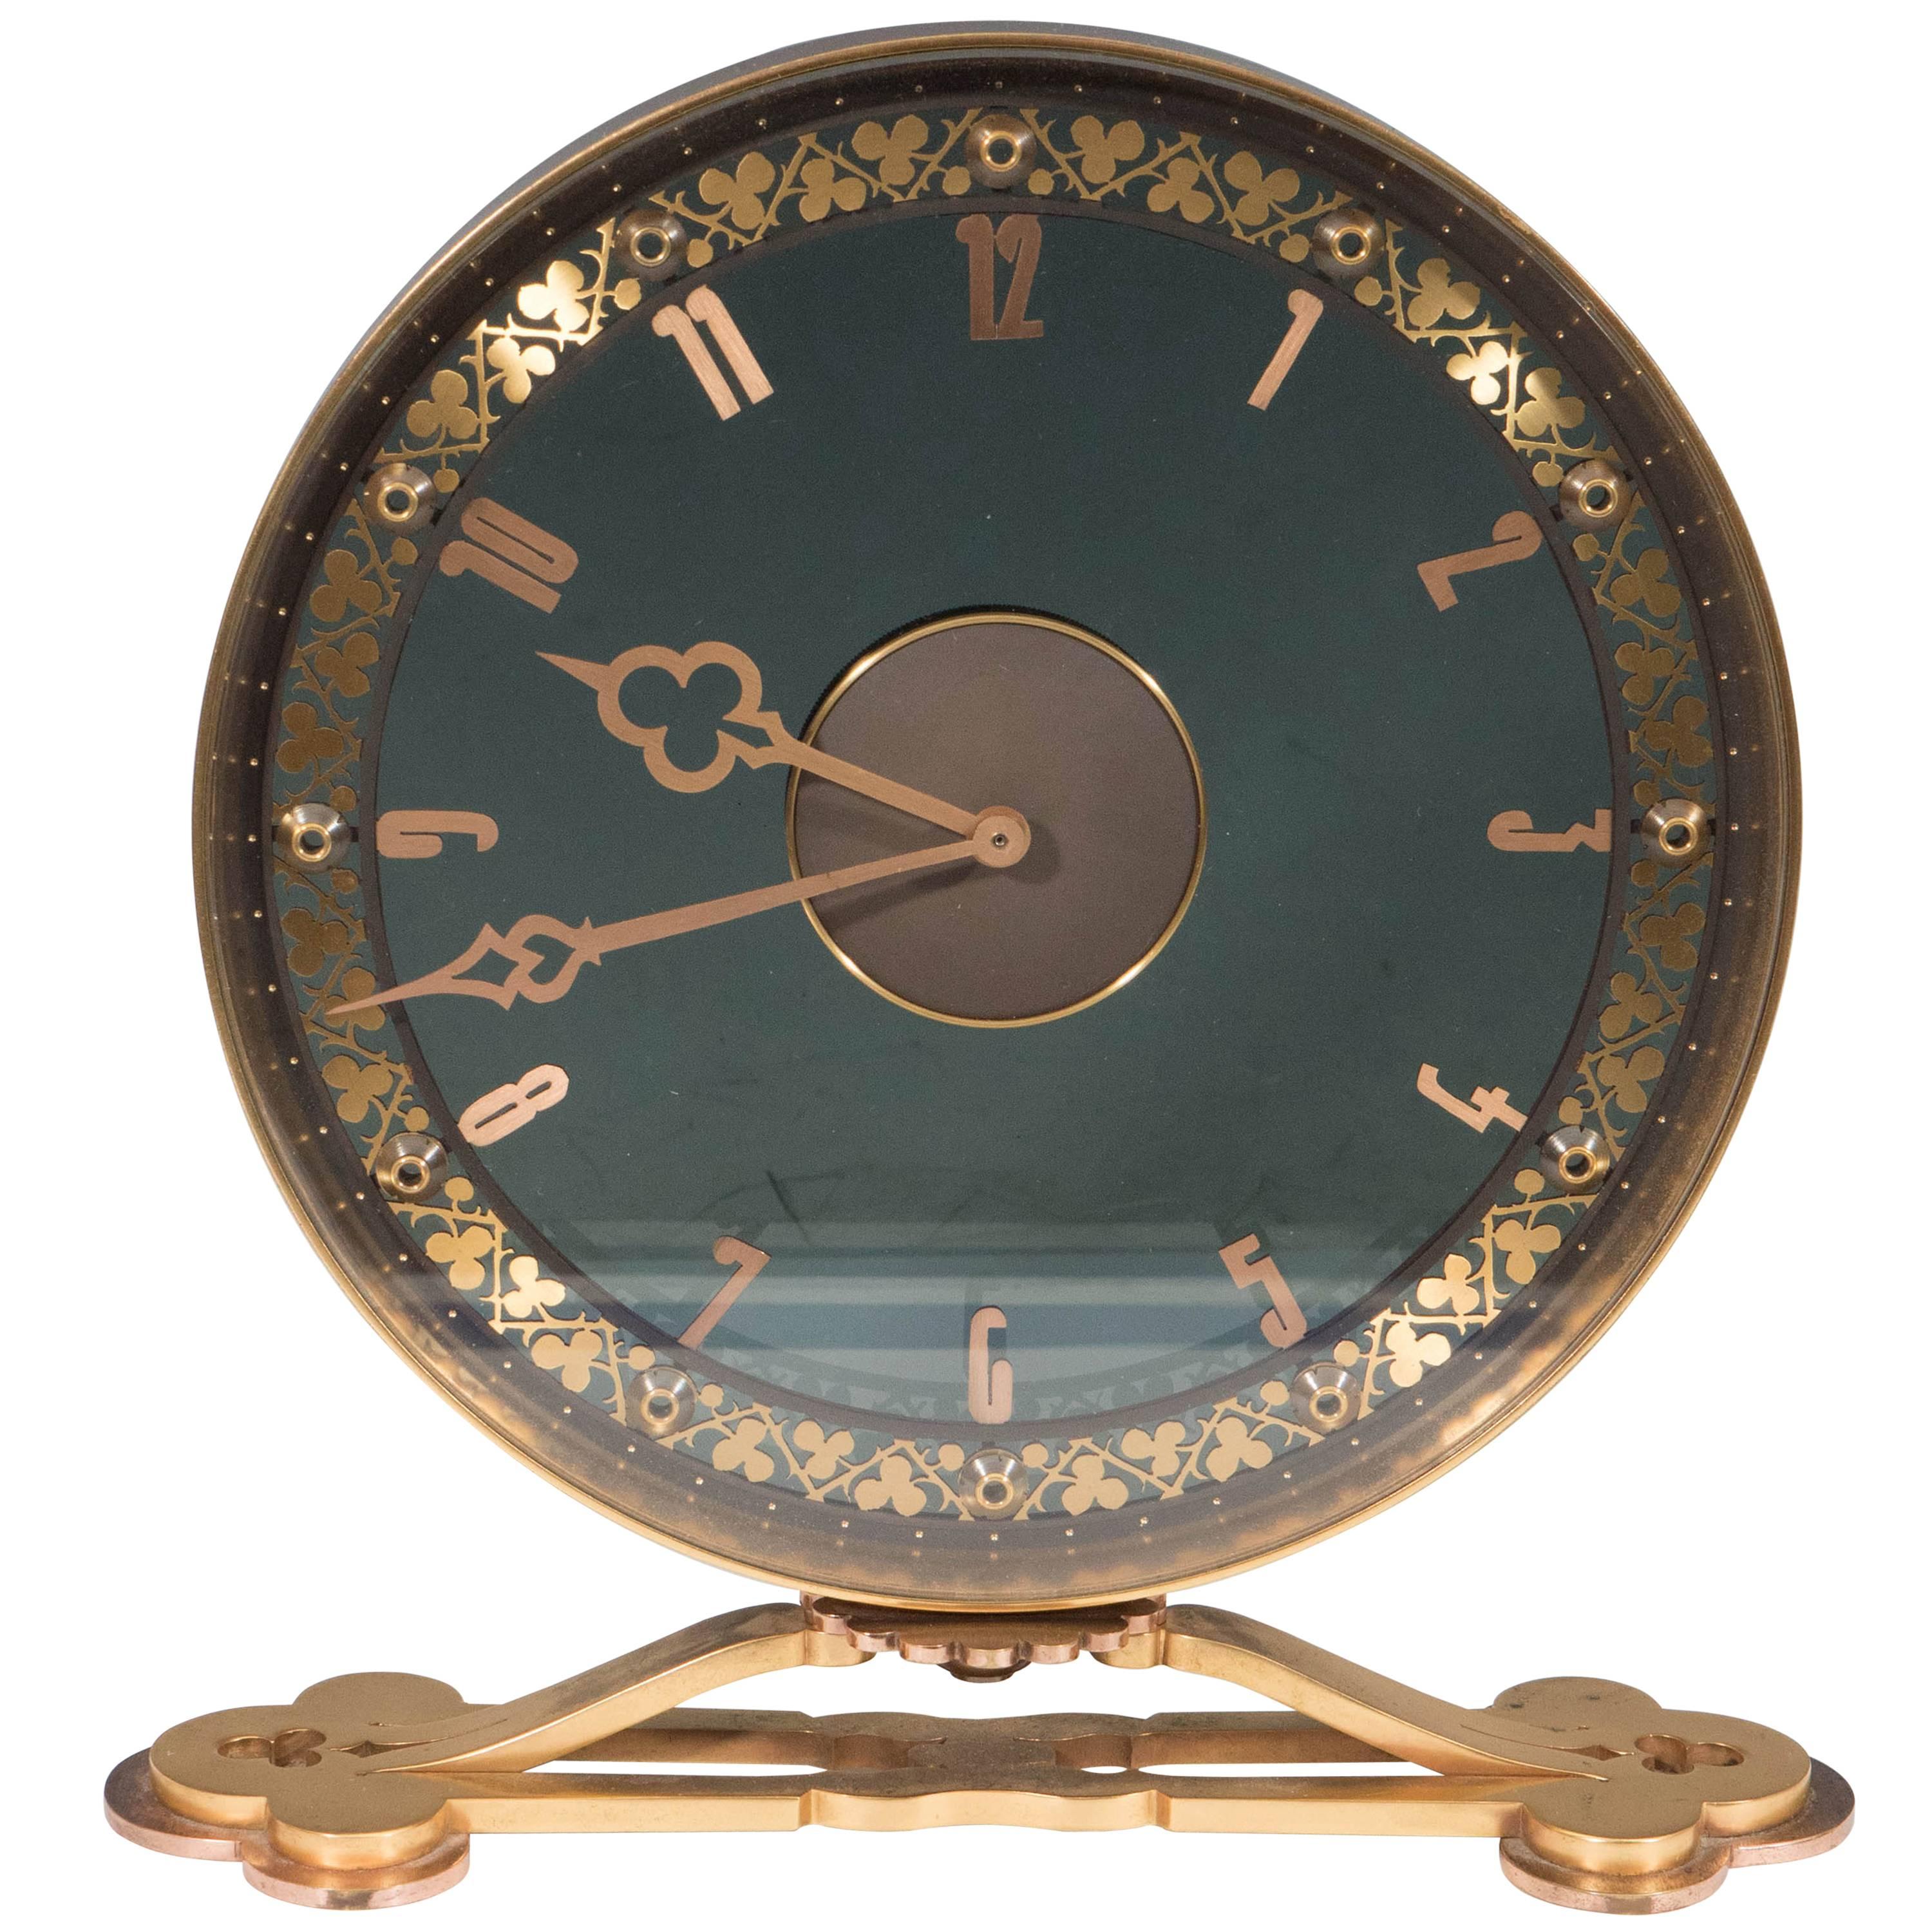 Jaeger-LeCoultre Desk Clock in Gilded Smoked Glass